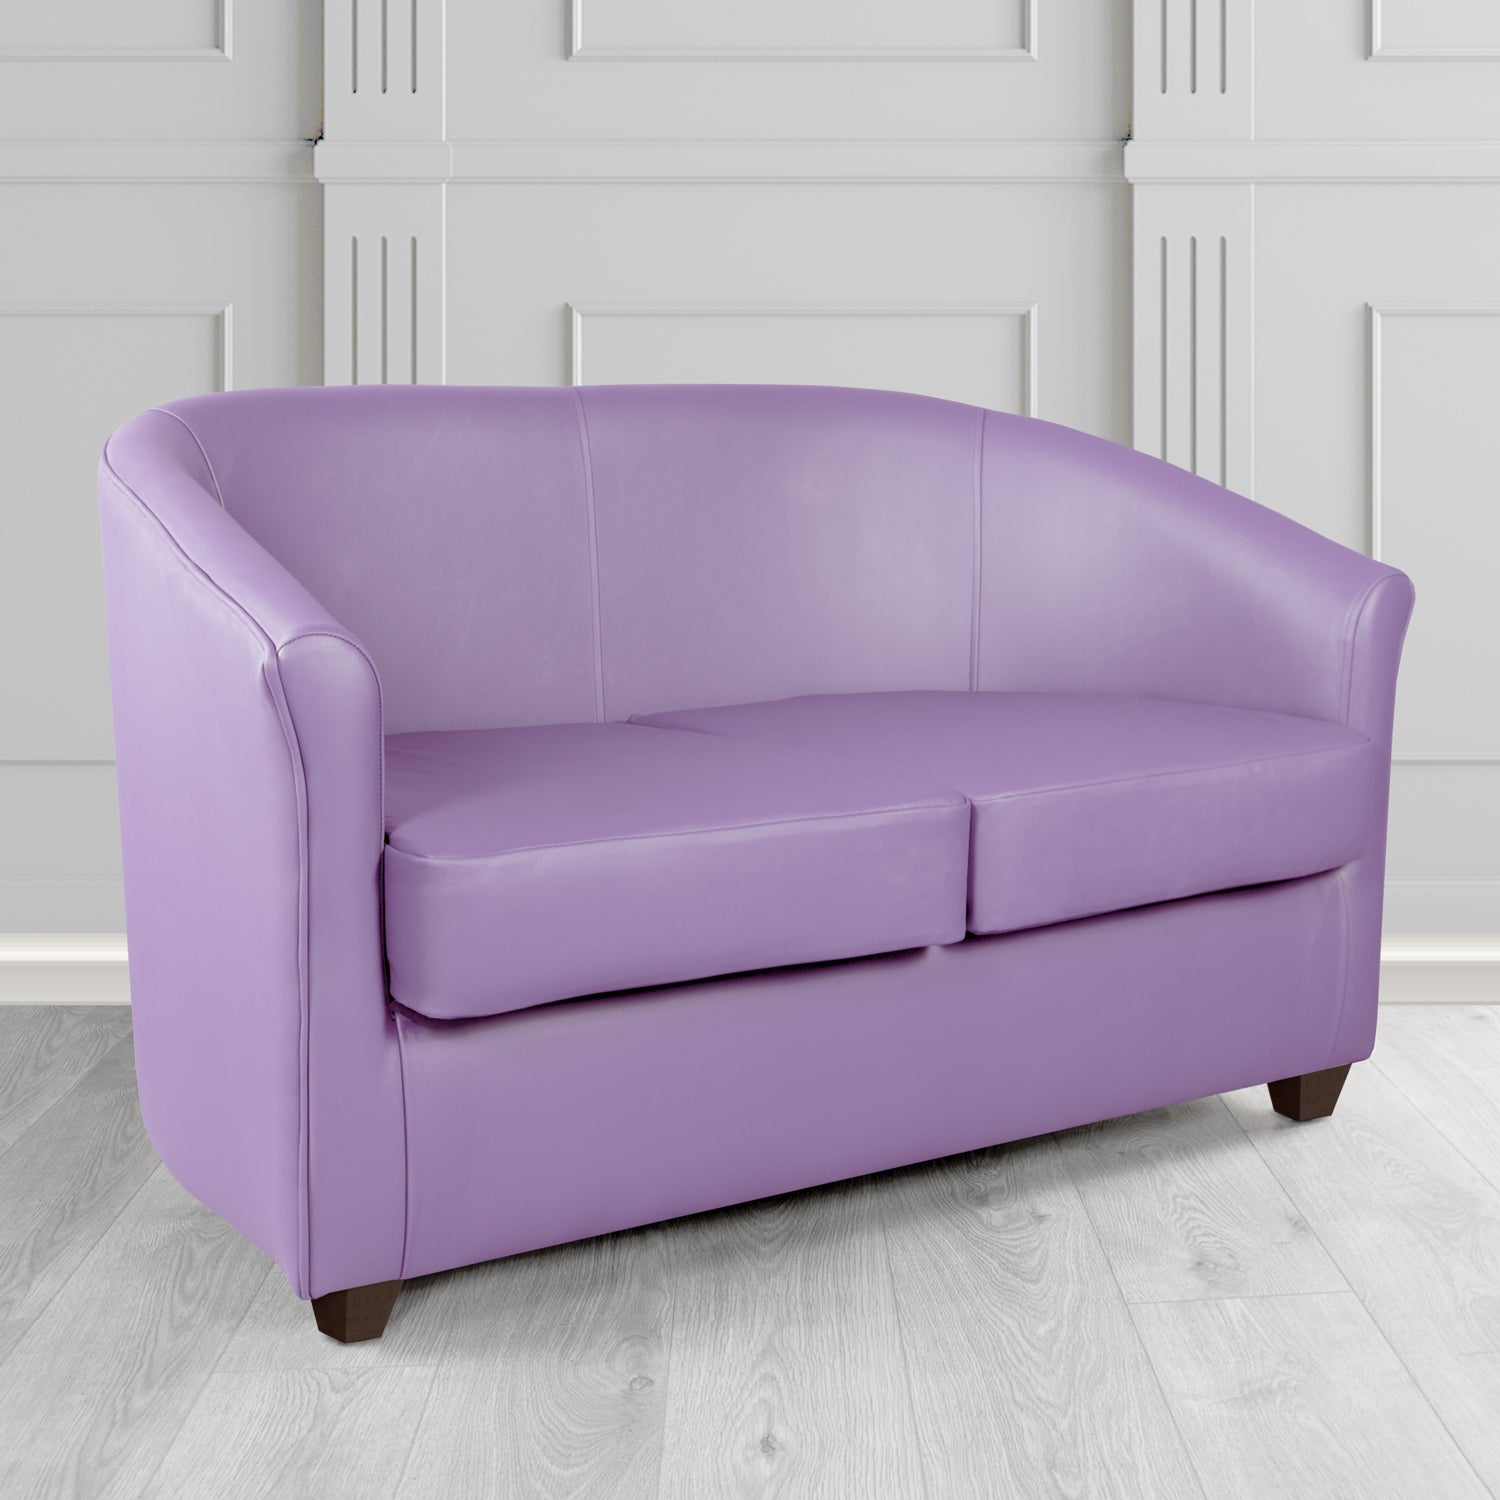 Cannes 2 Seater Tub Sofa in Just Colour Lilac Crib 5 Faux Leather - The Tub Chair Shop